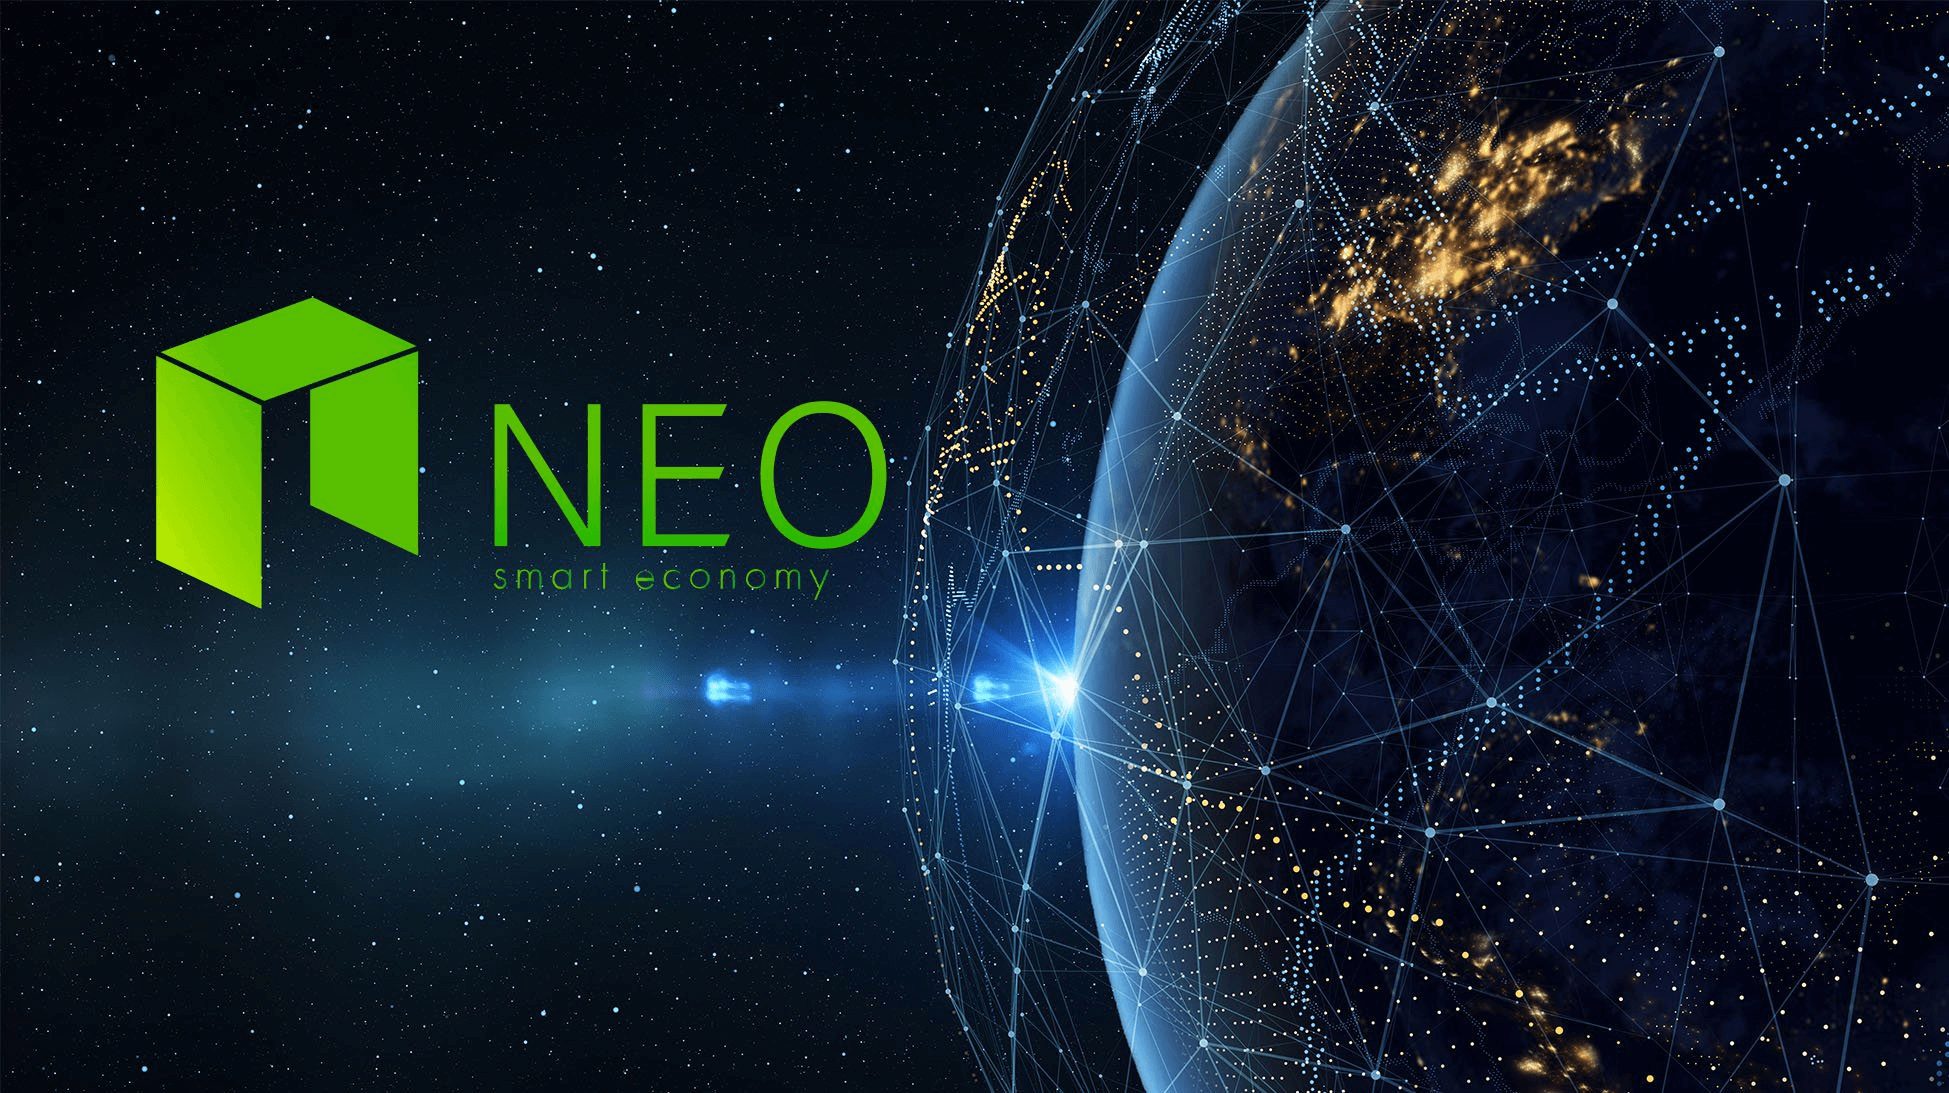 NEO, continues the development of consensus nodes and the decentralisation roadmap